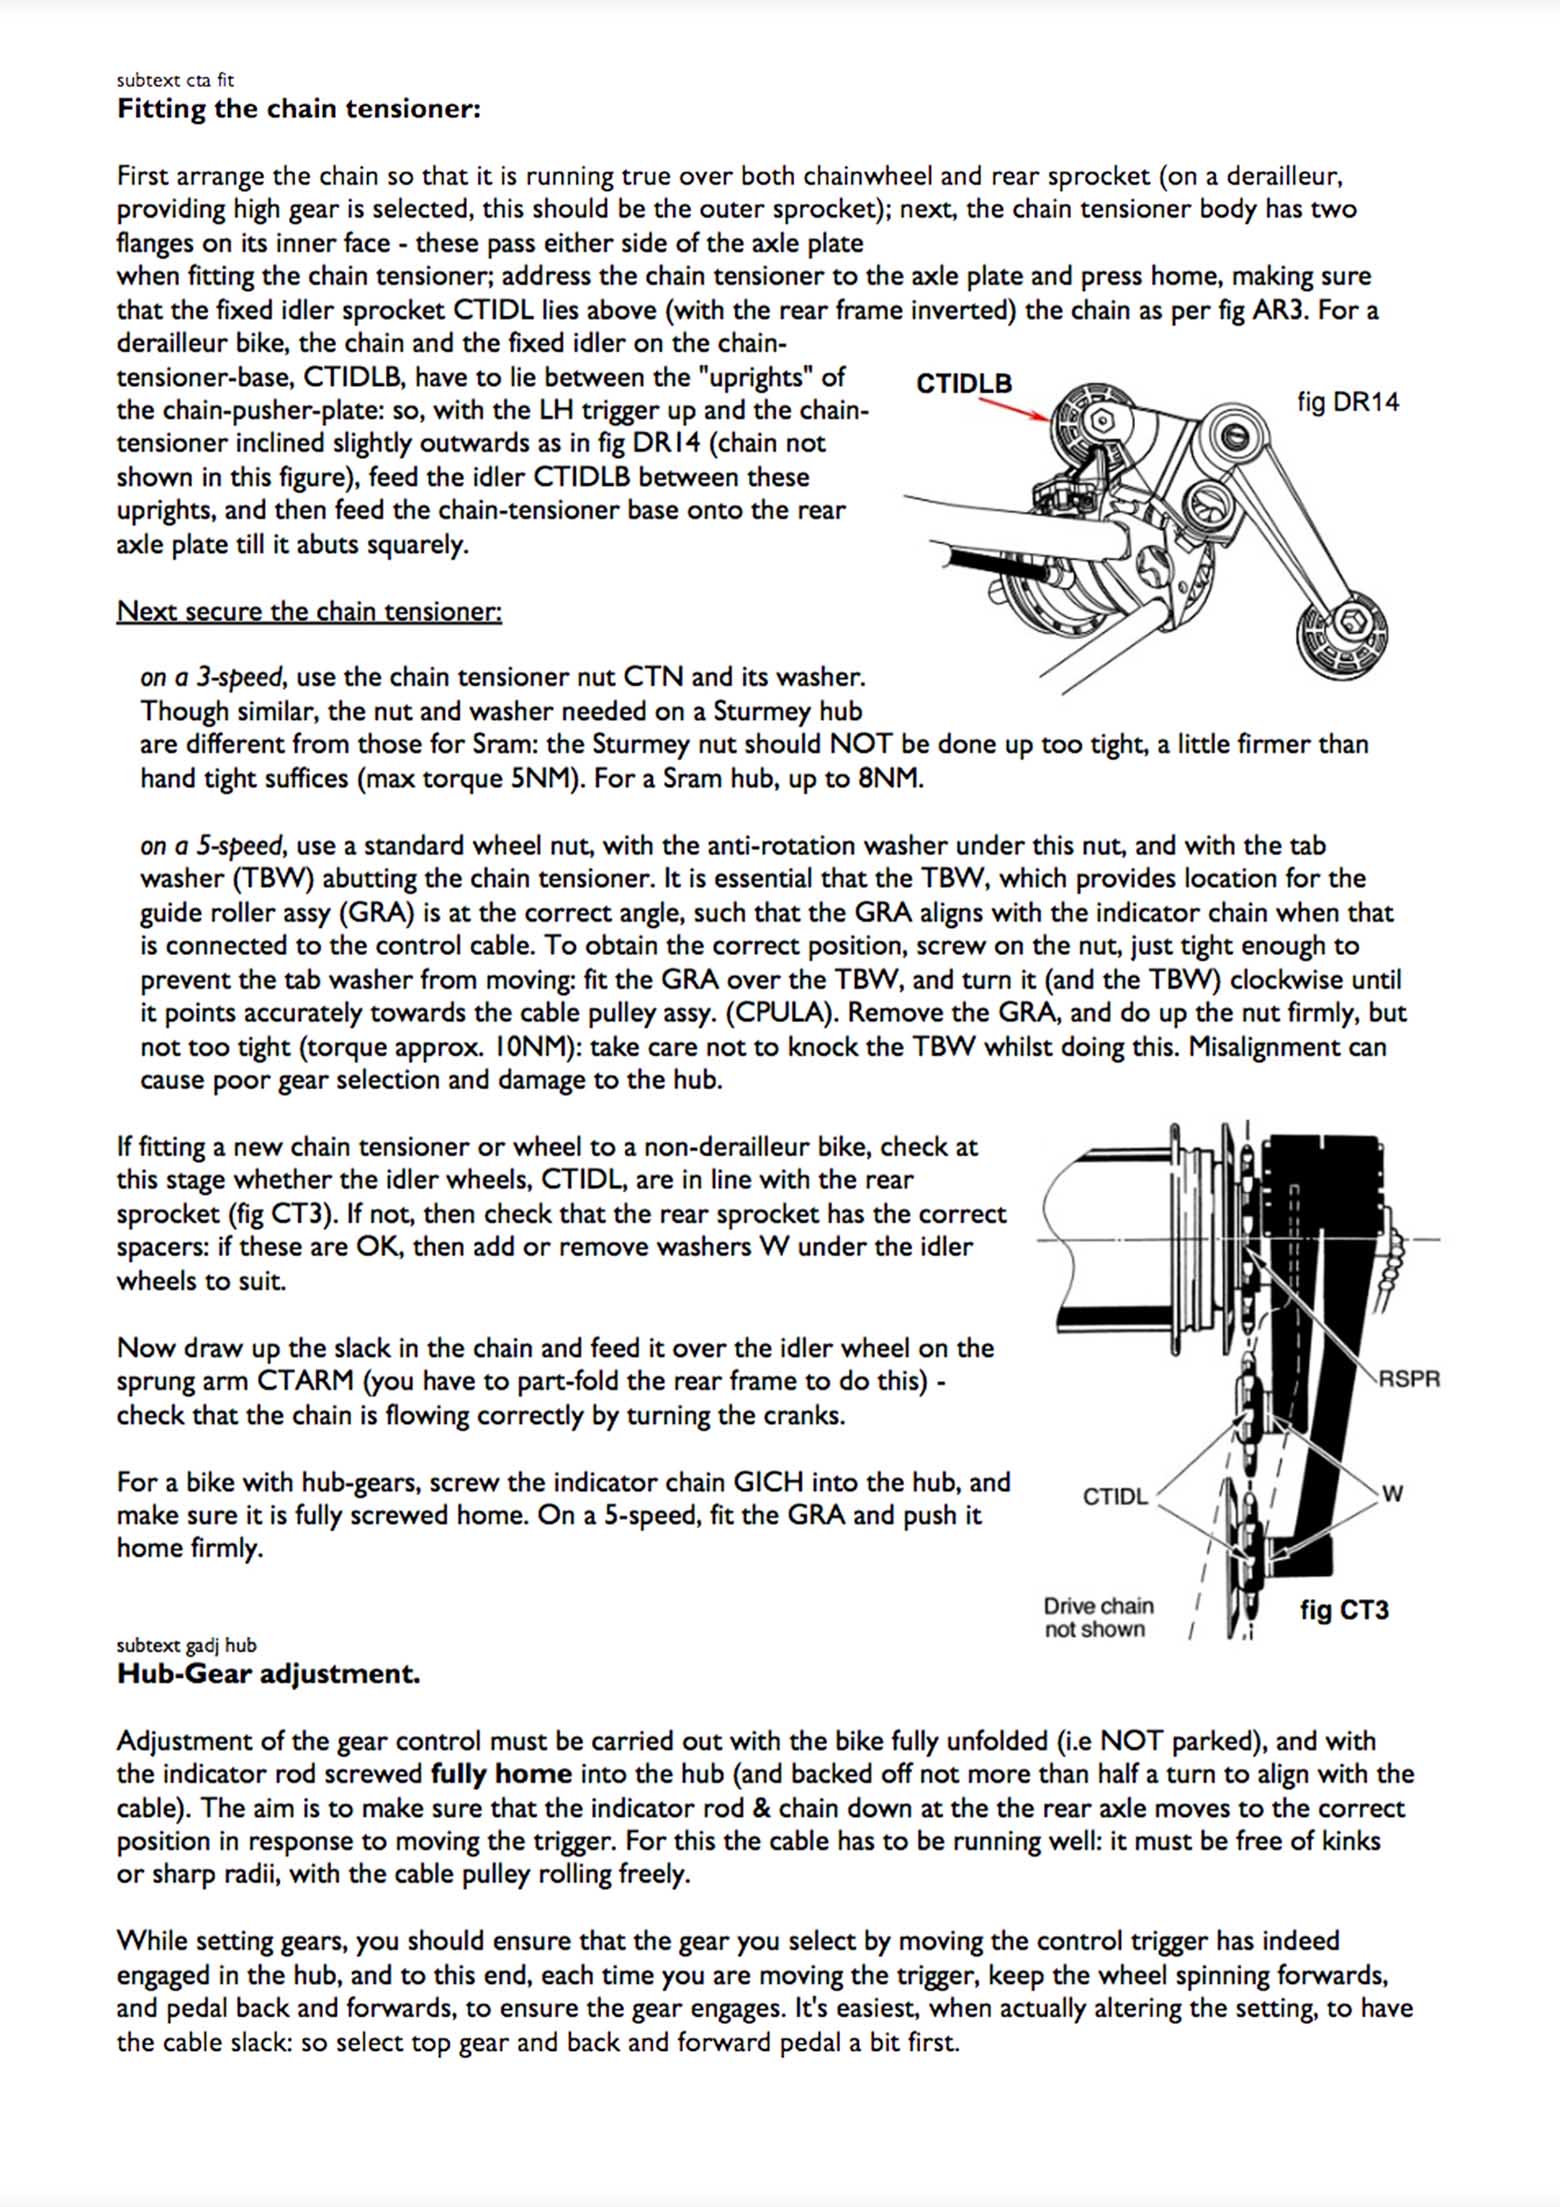 Brompton - Rear Wheel - Procedure for Removal and Refitting scan 2 main image